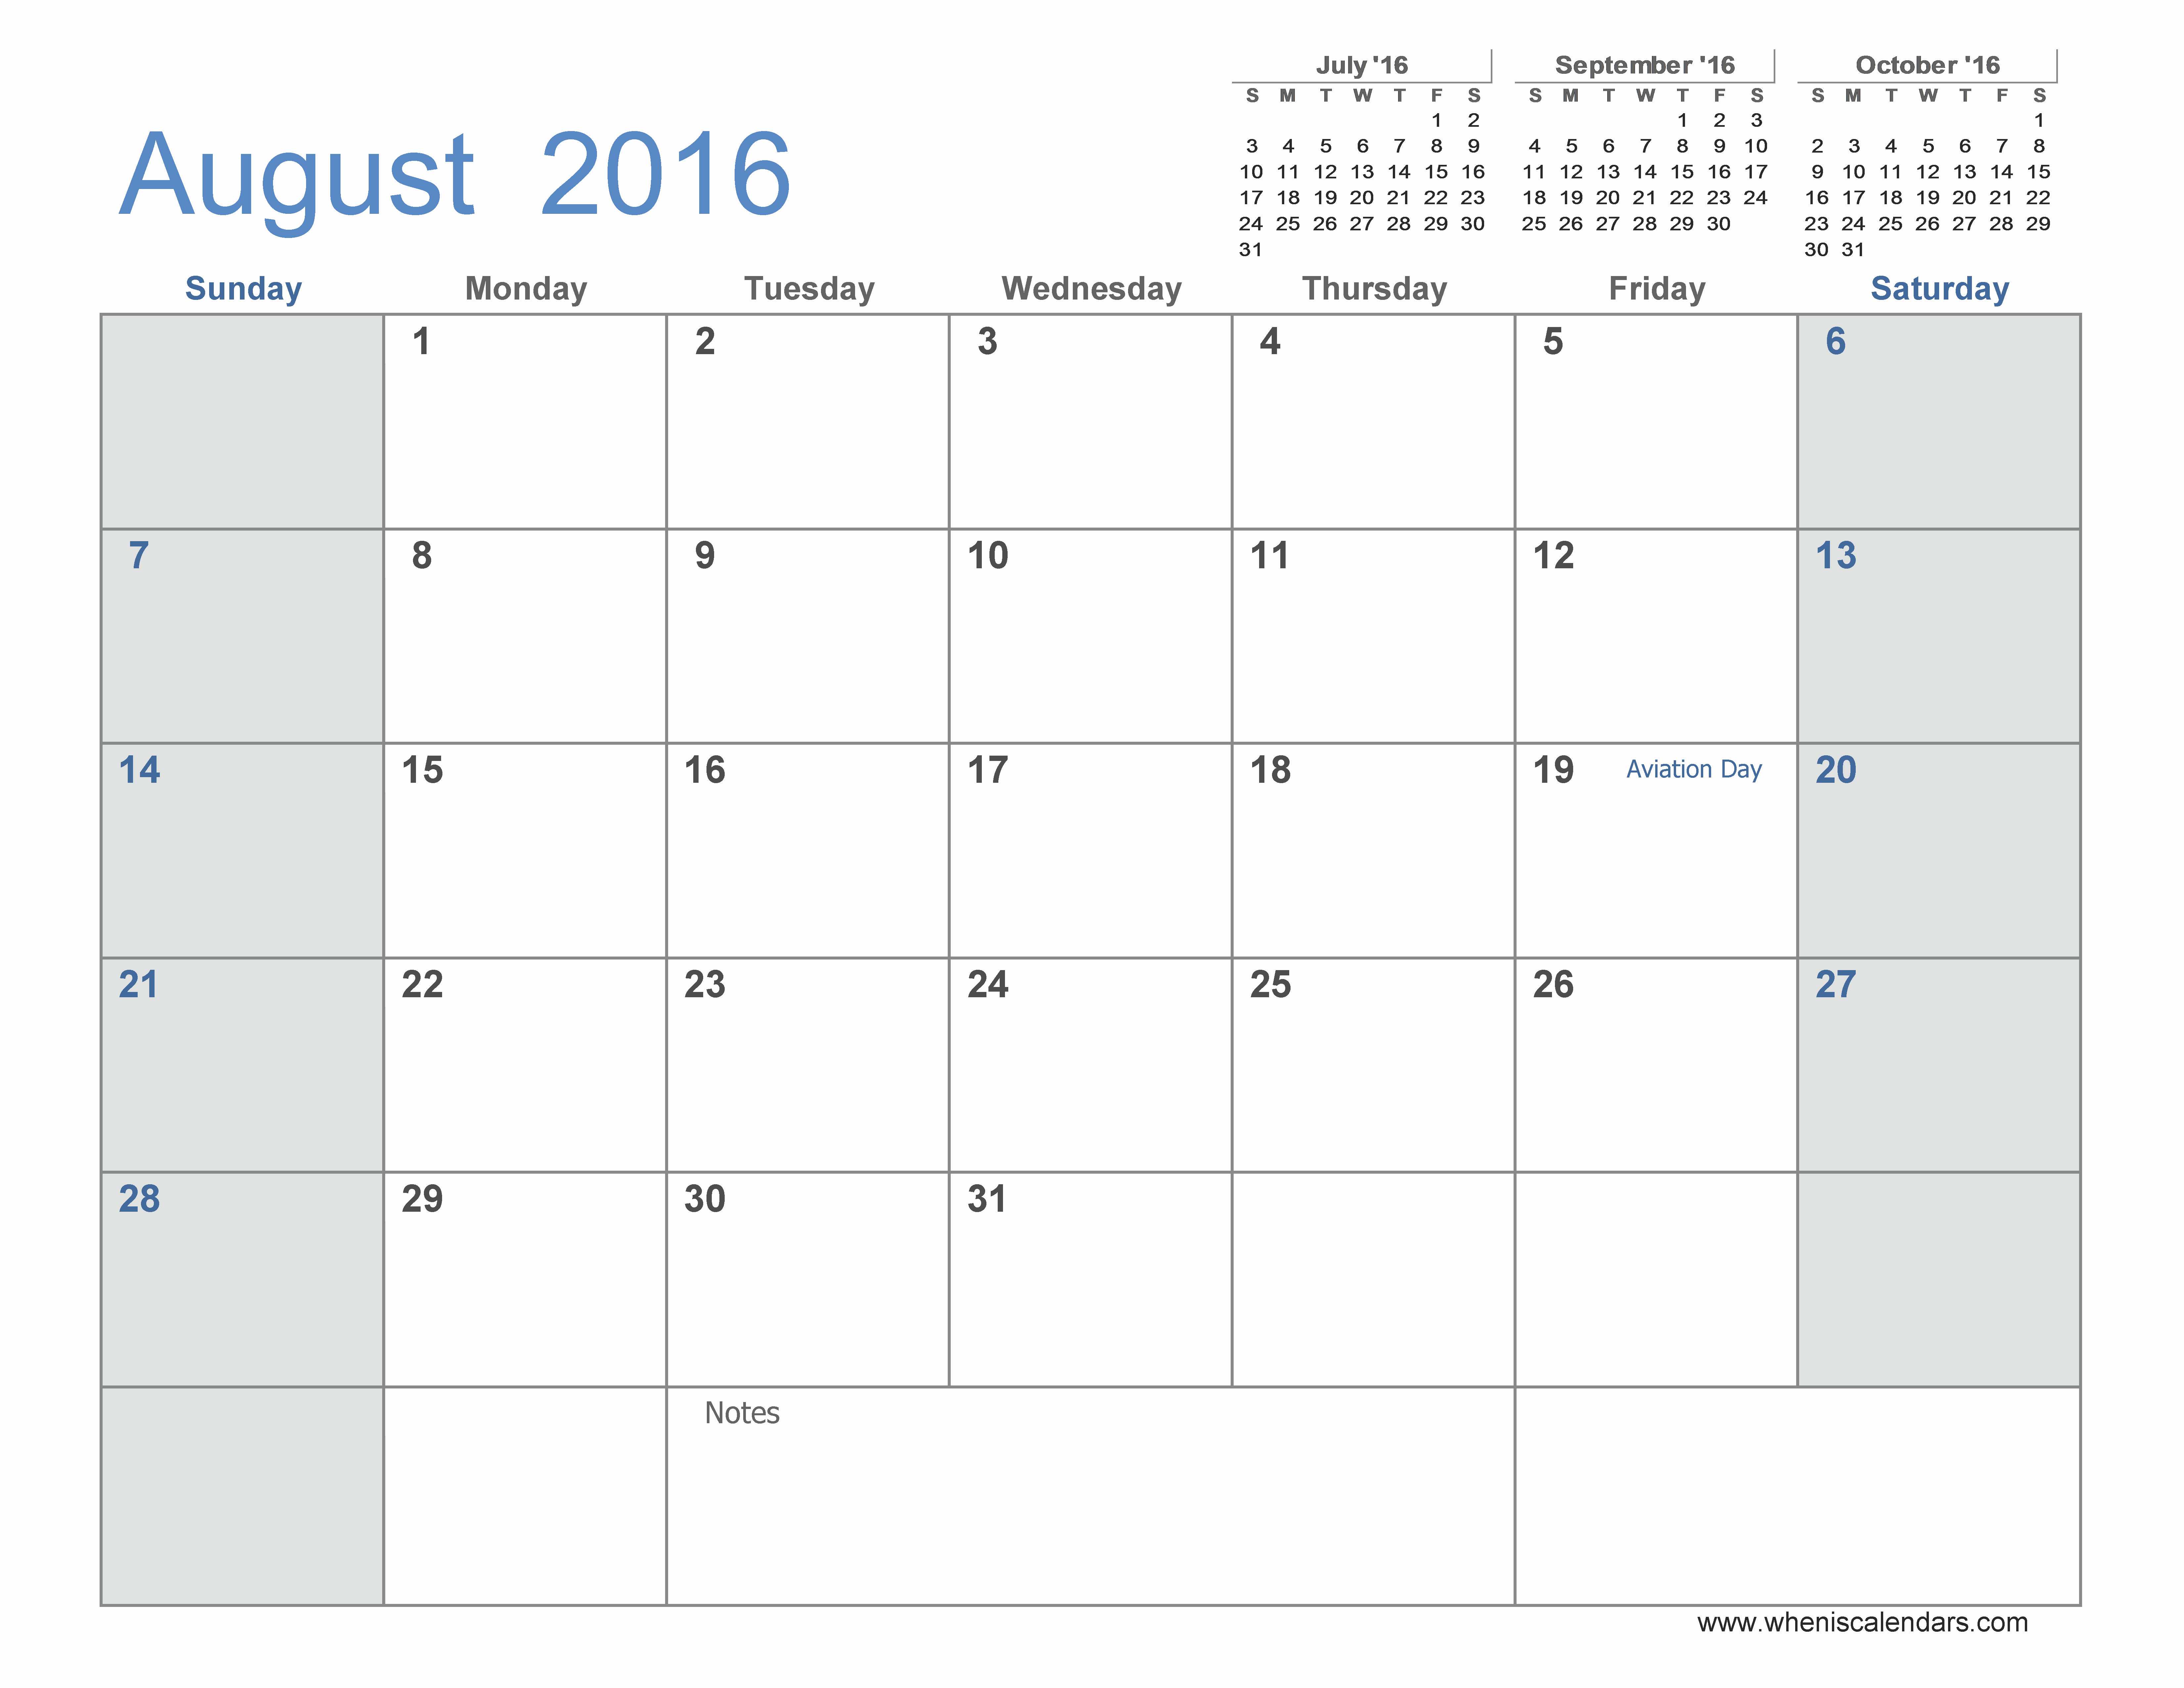 3 Month Calendar 2016 Template Awesome Calendar 2016 by Month to Print Aug 2016 Monthly Calendar